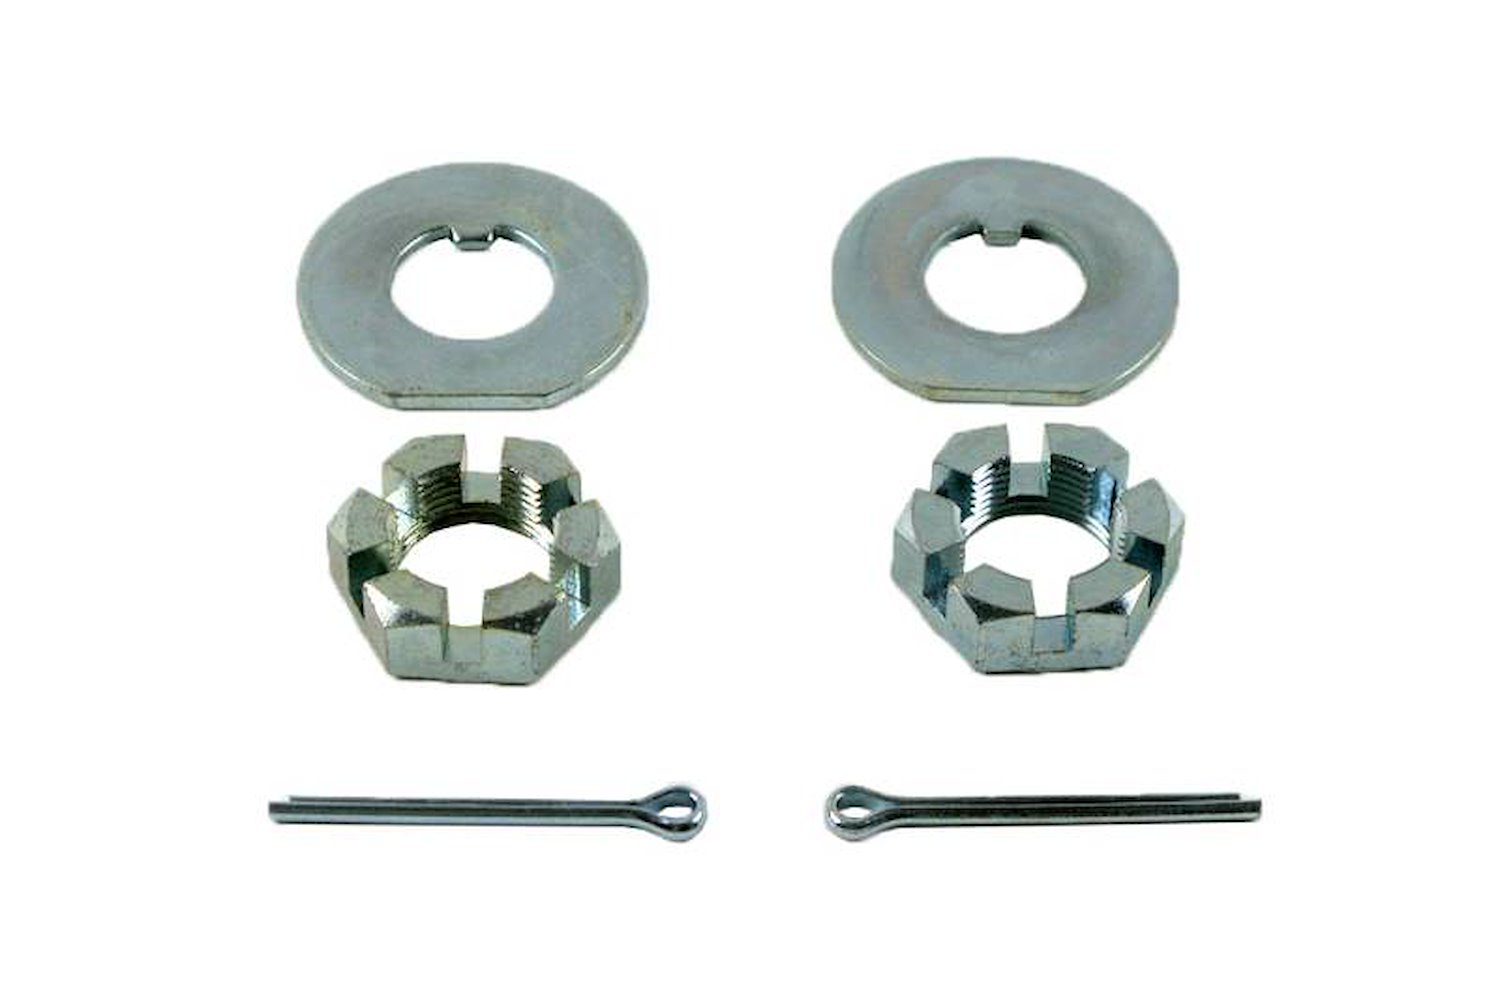 SNW001 1955-1968 Chevrolet Full-Size Spindle Nut & Washer Kit